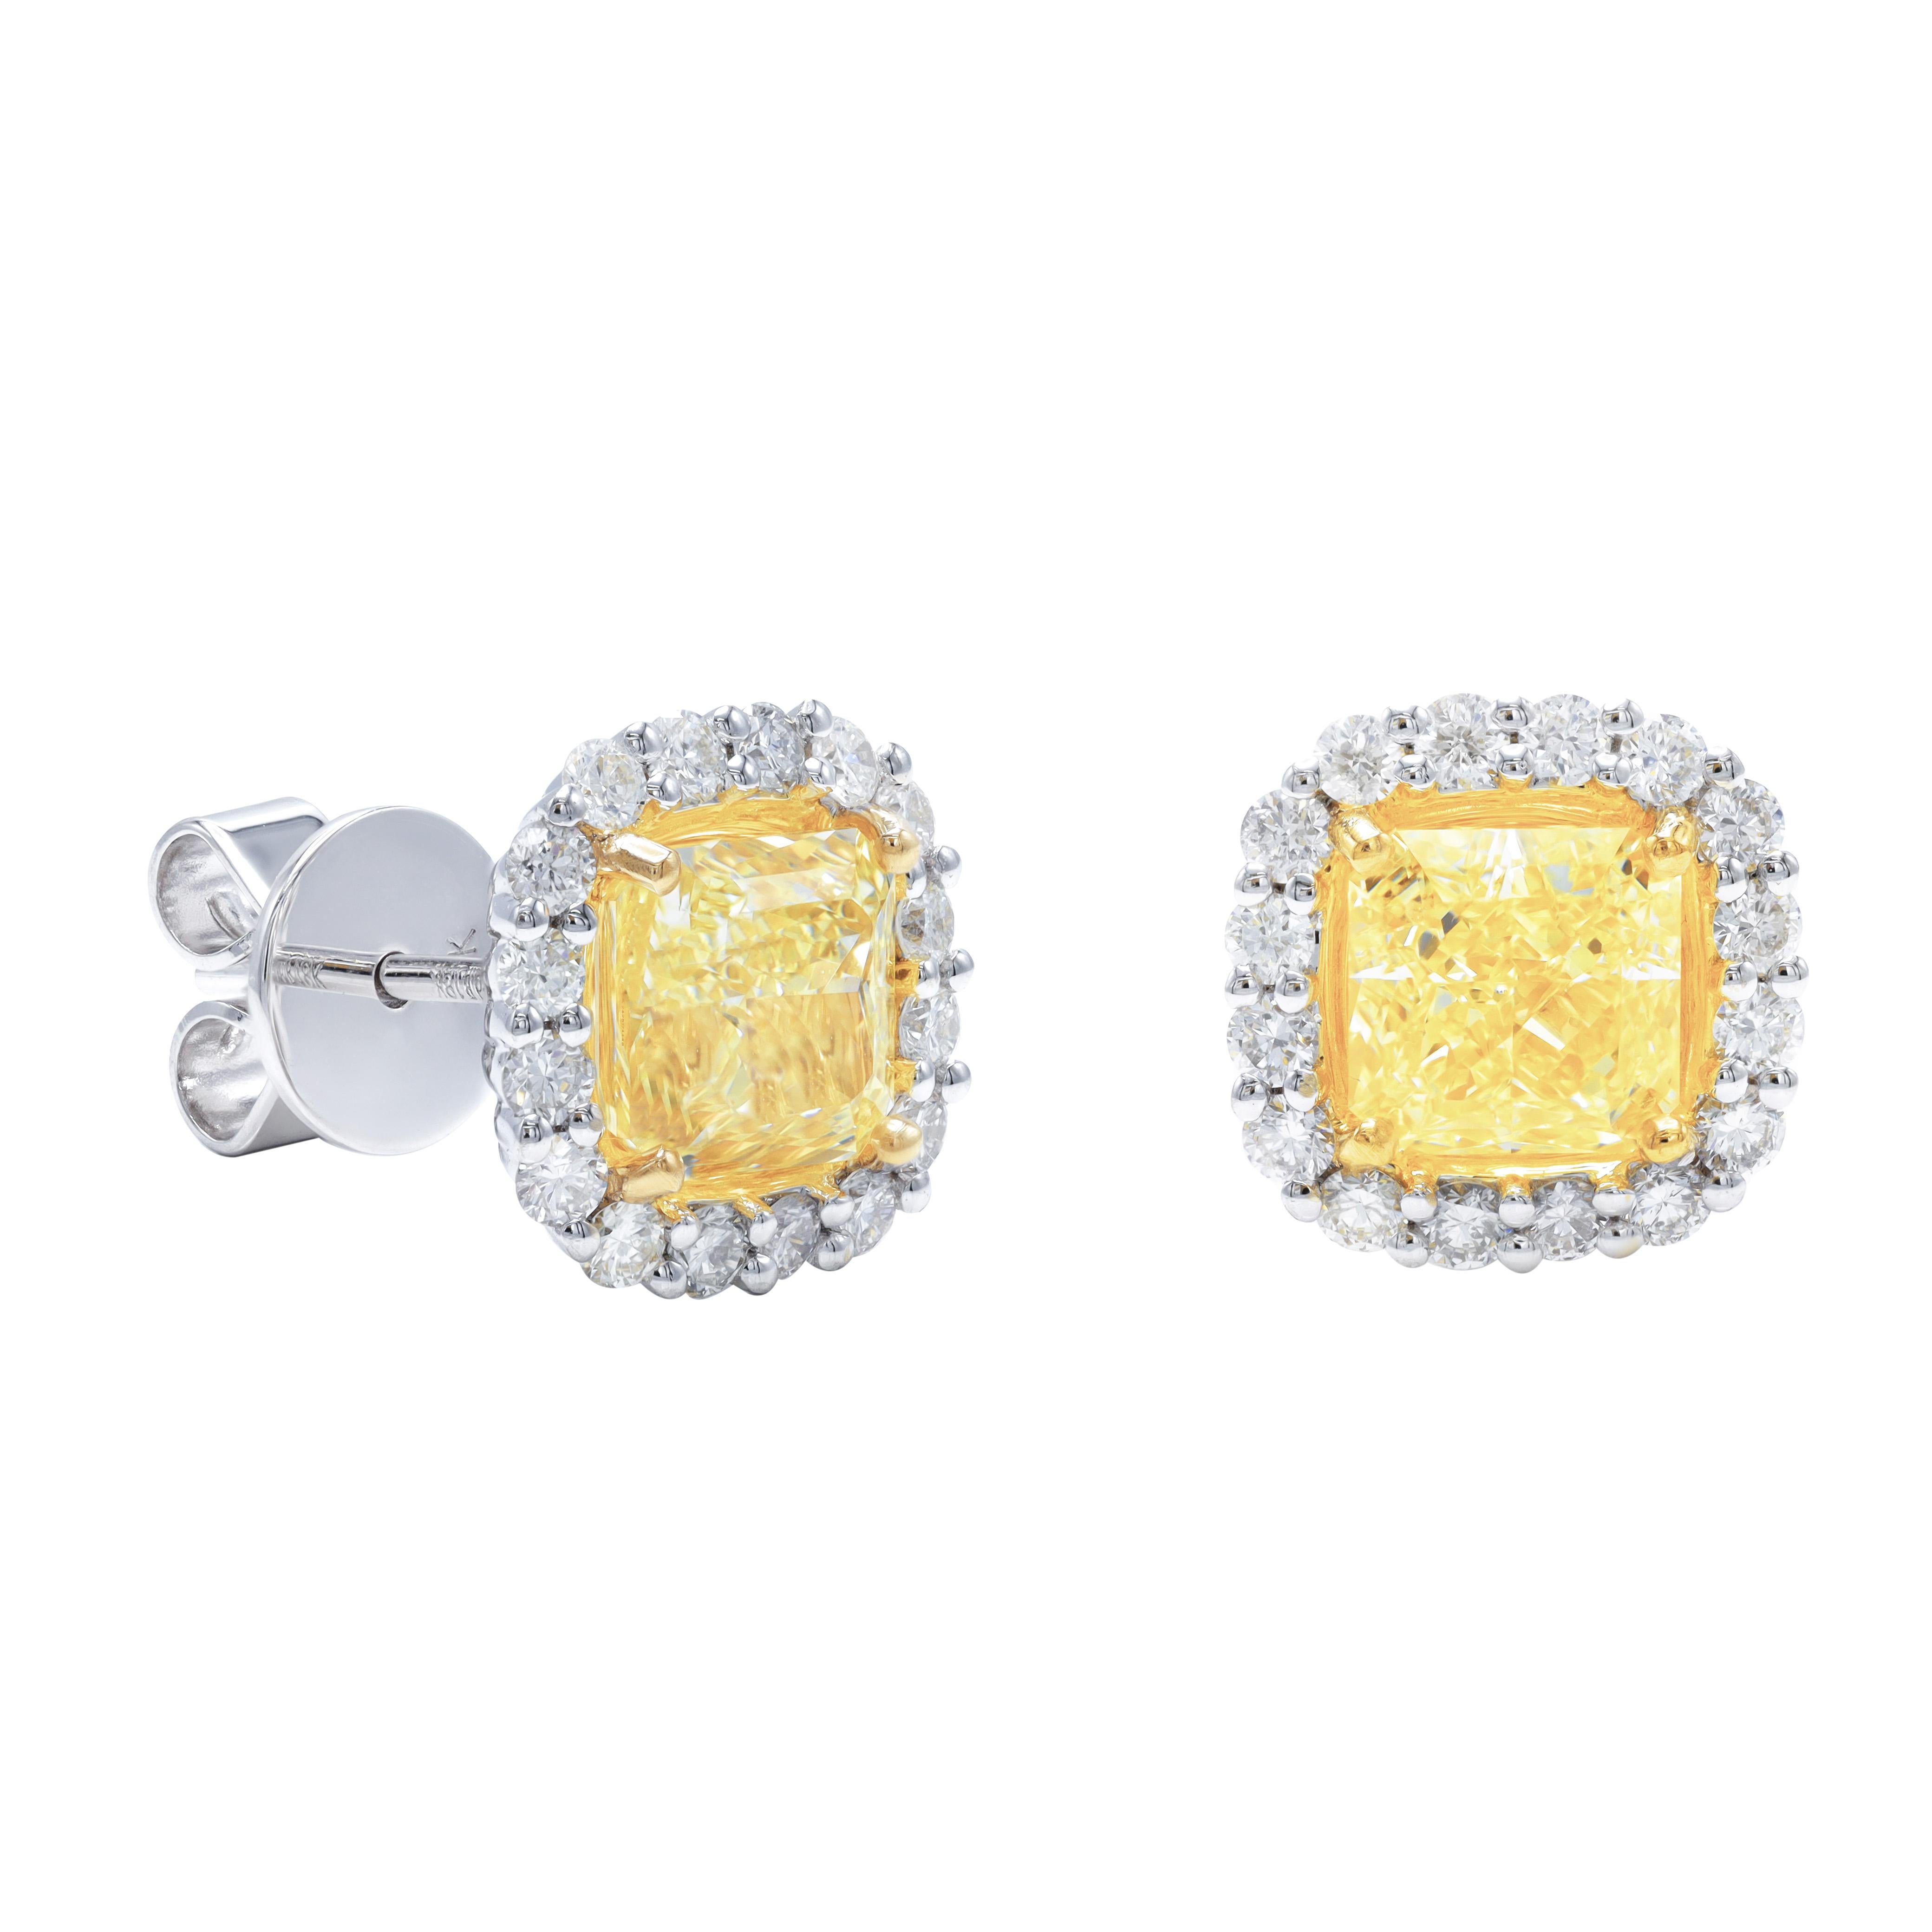 18kt white and yellow gold stud earrings featuring 2 GIA certified  cushion shape yellow diamond centers weighing 3.08 cts tw ( FY VS2-VS1 CUSHION SHAPE GIA (1.58CTS FY VS2 GIA#2437356971 & 1.50CTS FY VS1 GIA#2386923147 surrounded by 0.75 cts of